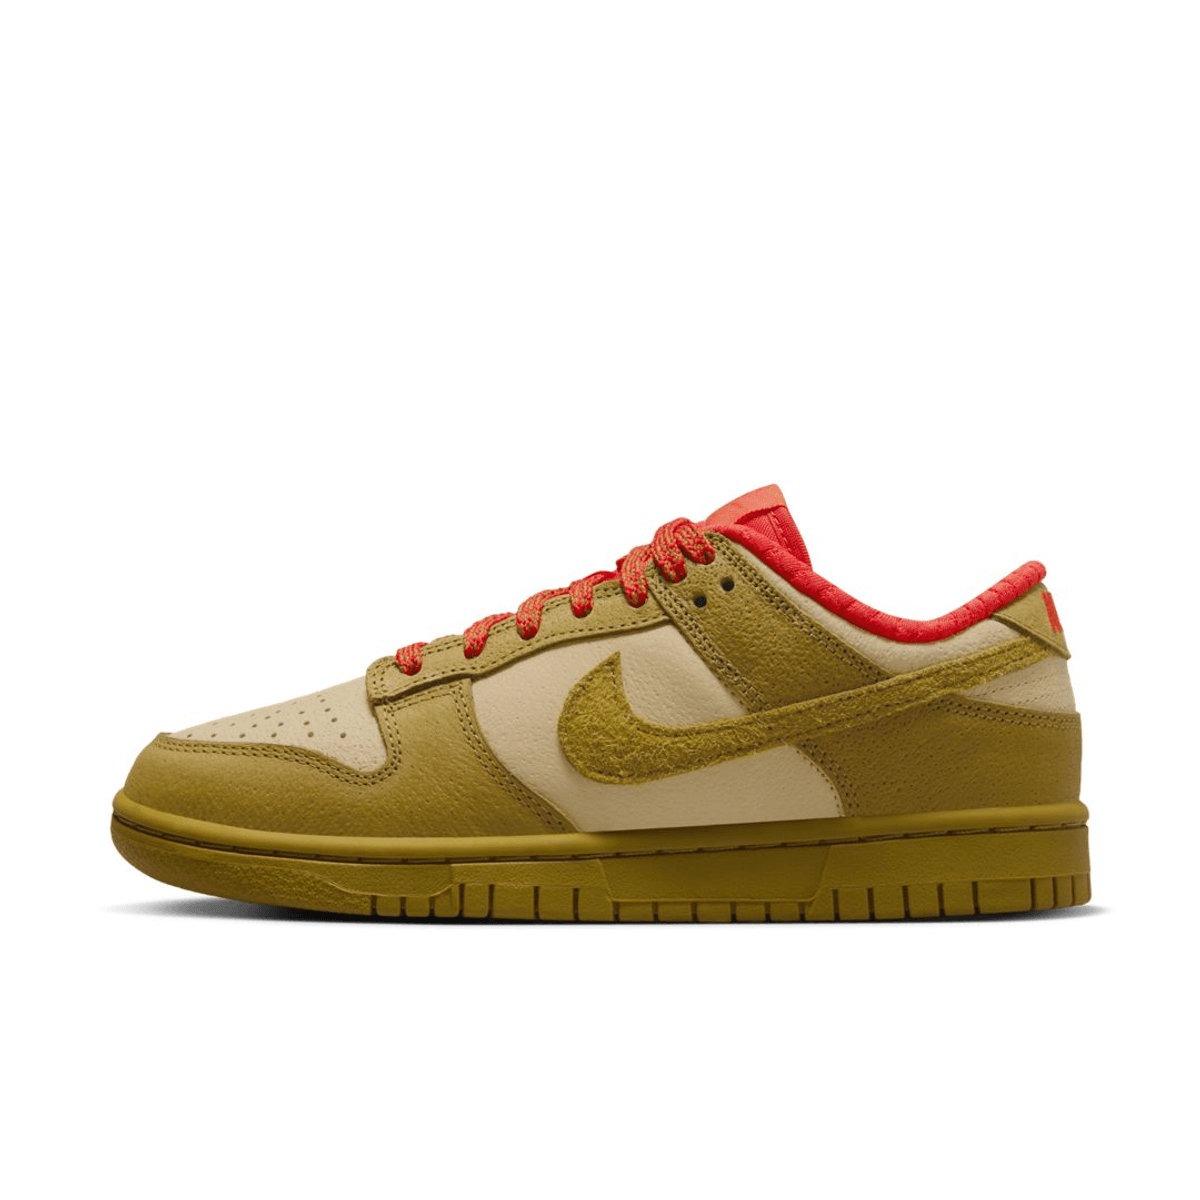 A New Nike Dunk Low Arrives In Sesame, Bronzine, and Picante Red